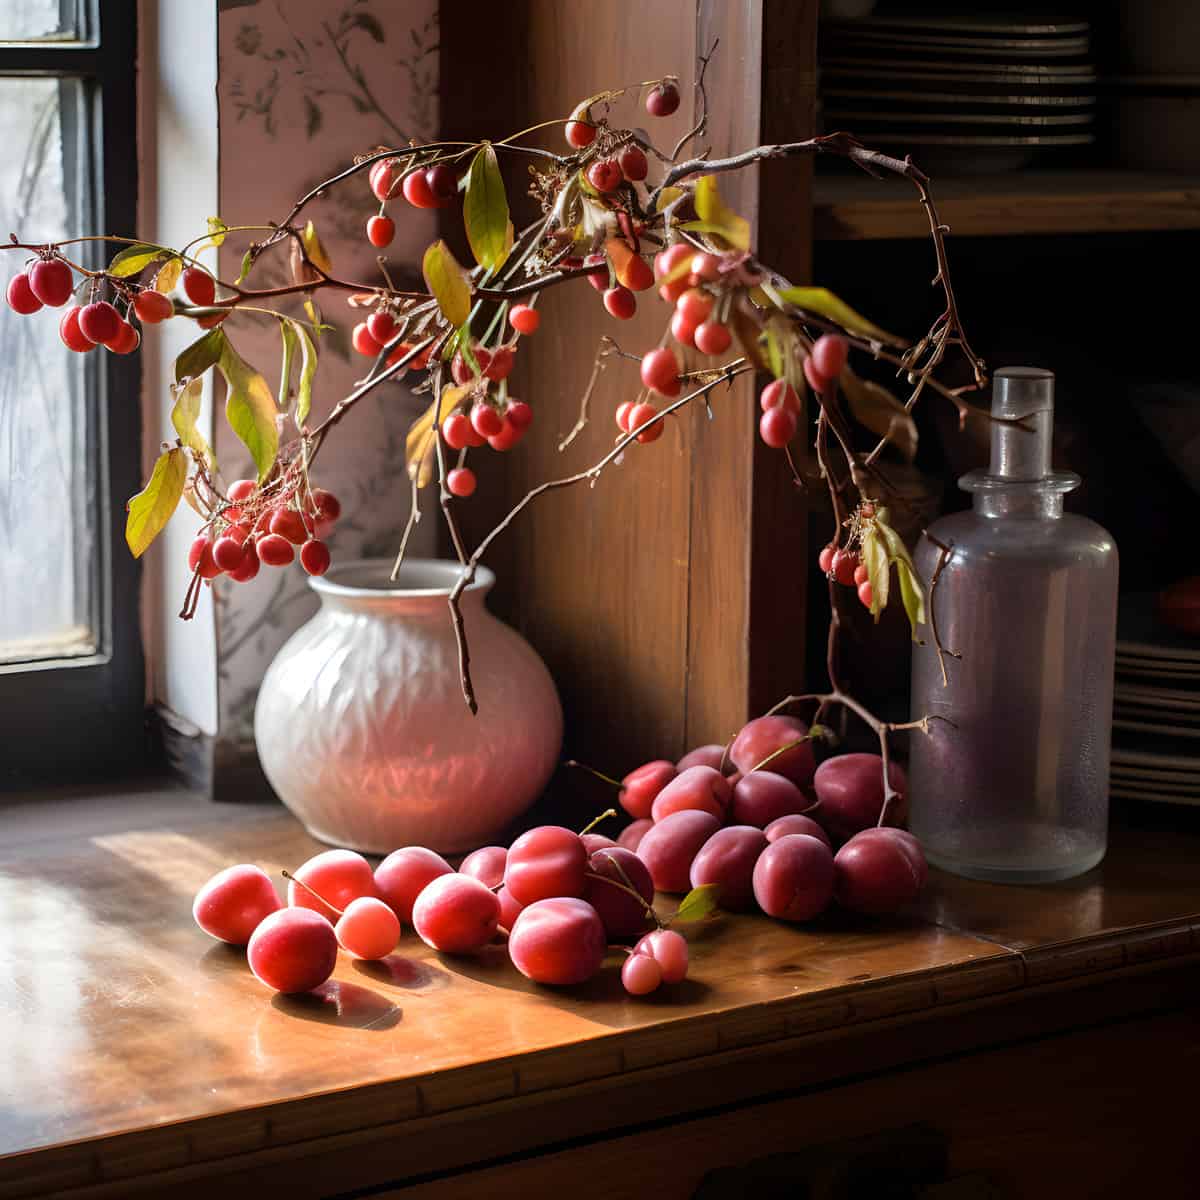 Chinese Plum on a kitchen counter